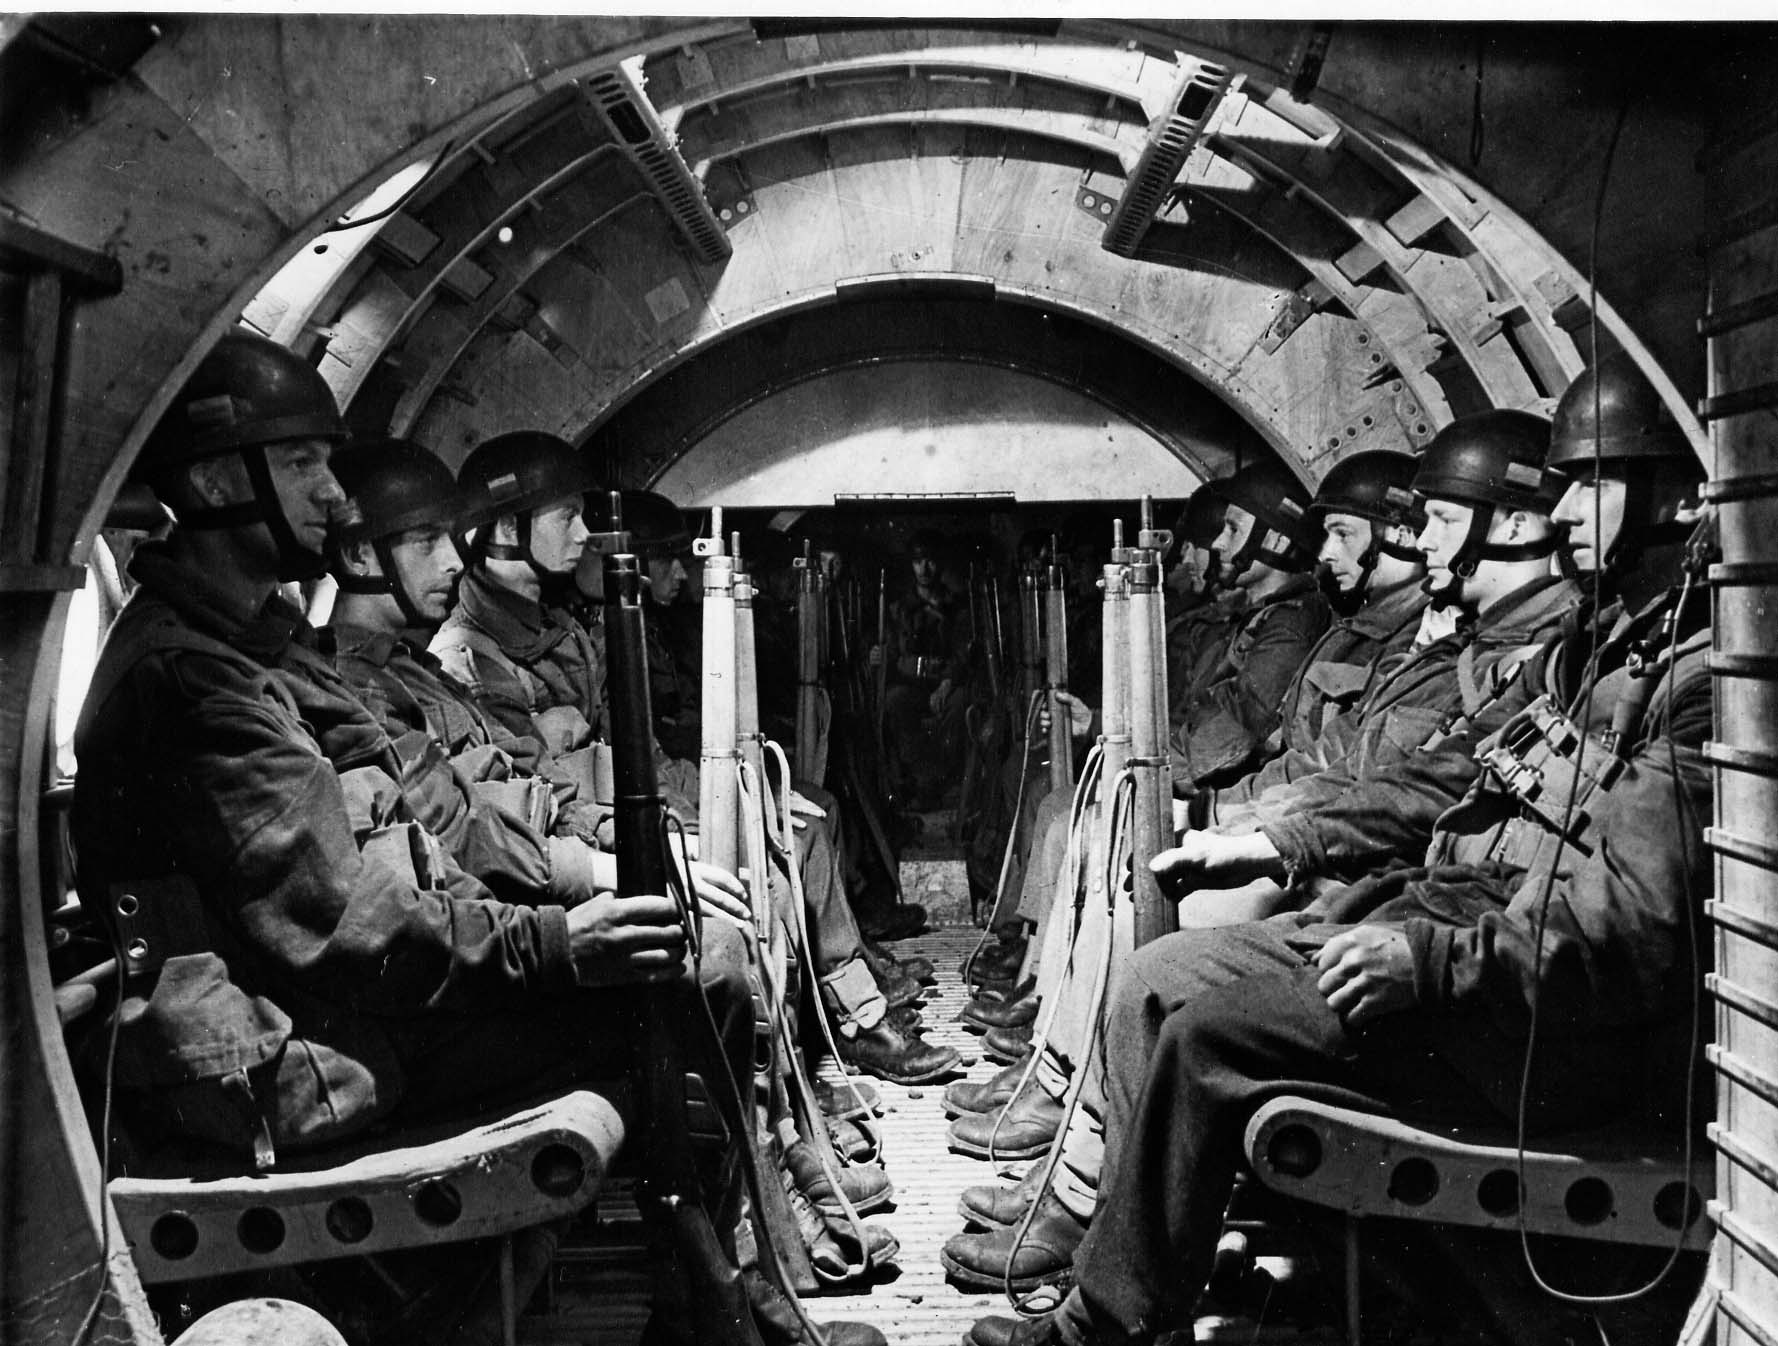 Horsa glider with troops (inside)